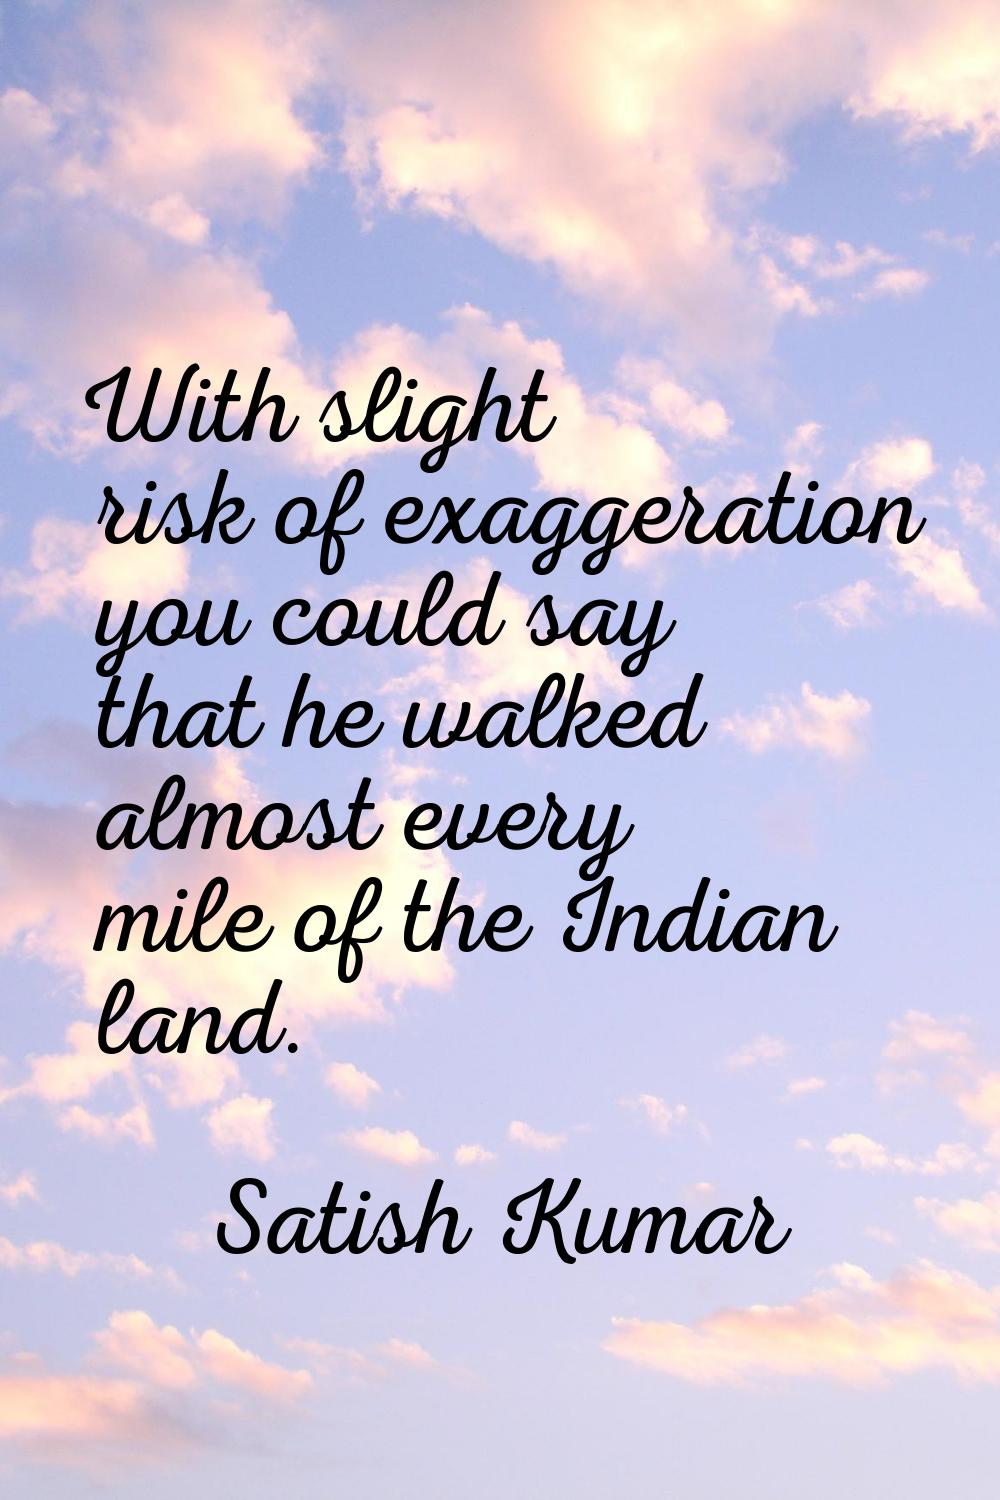 With slight risk of exaggeration you could say that he walked almost every mile of the Indian land.